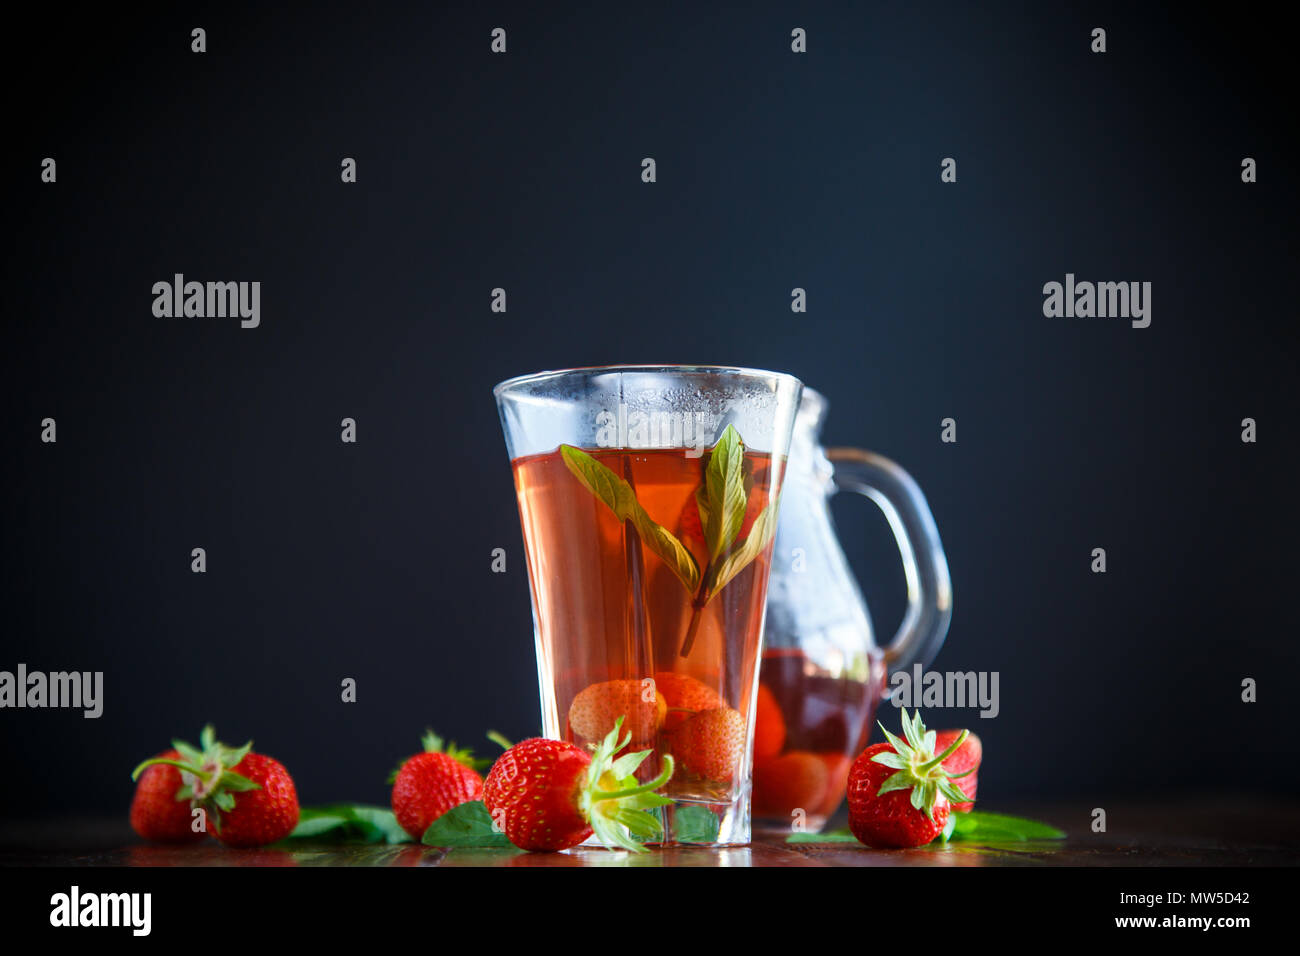 Sweet compote of ripe red strawberries in a glass decanter on a black background Stock Photo